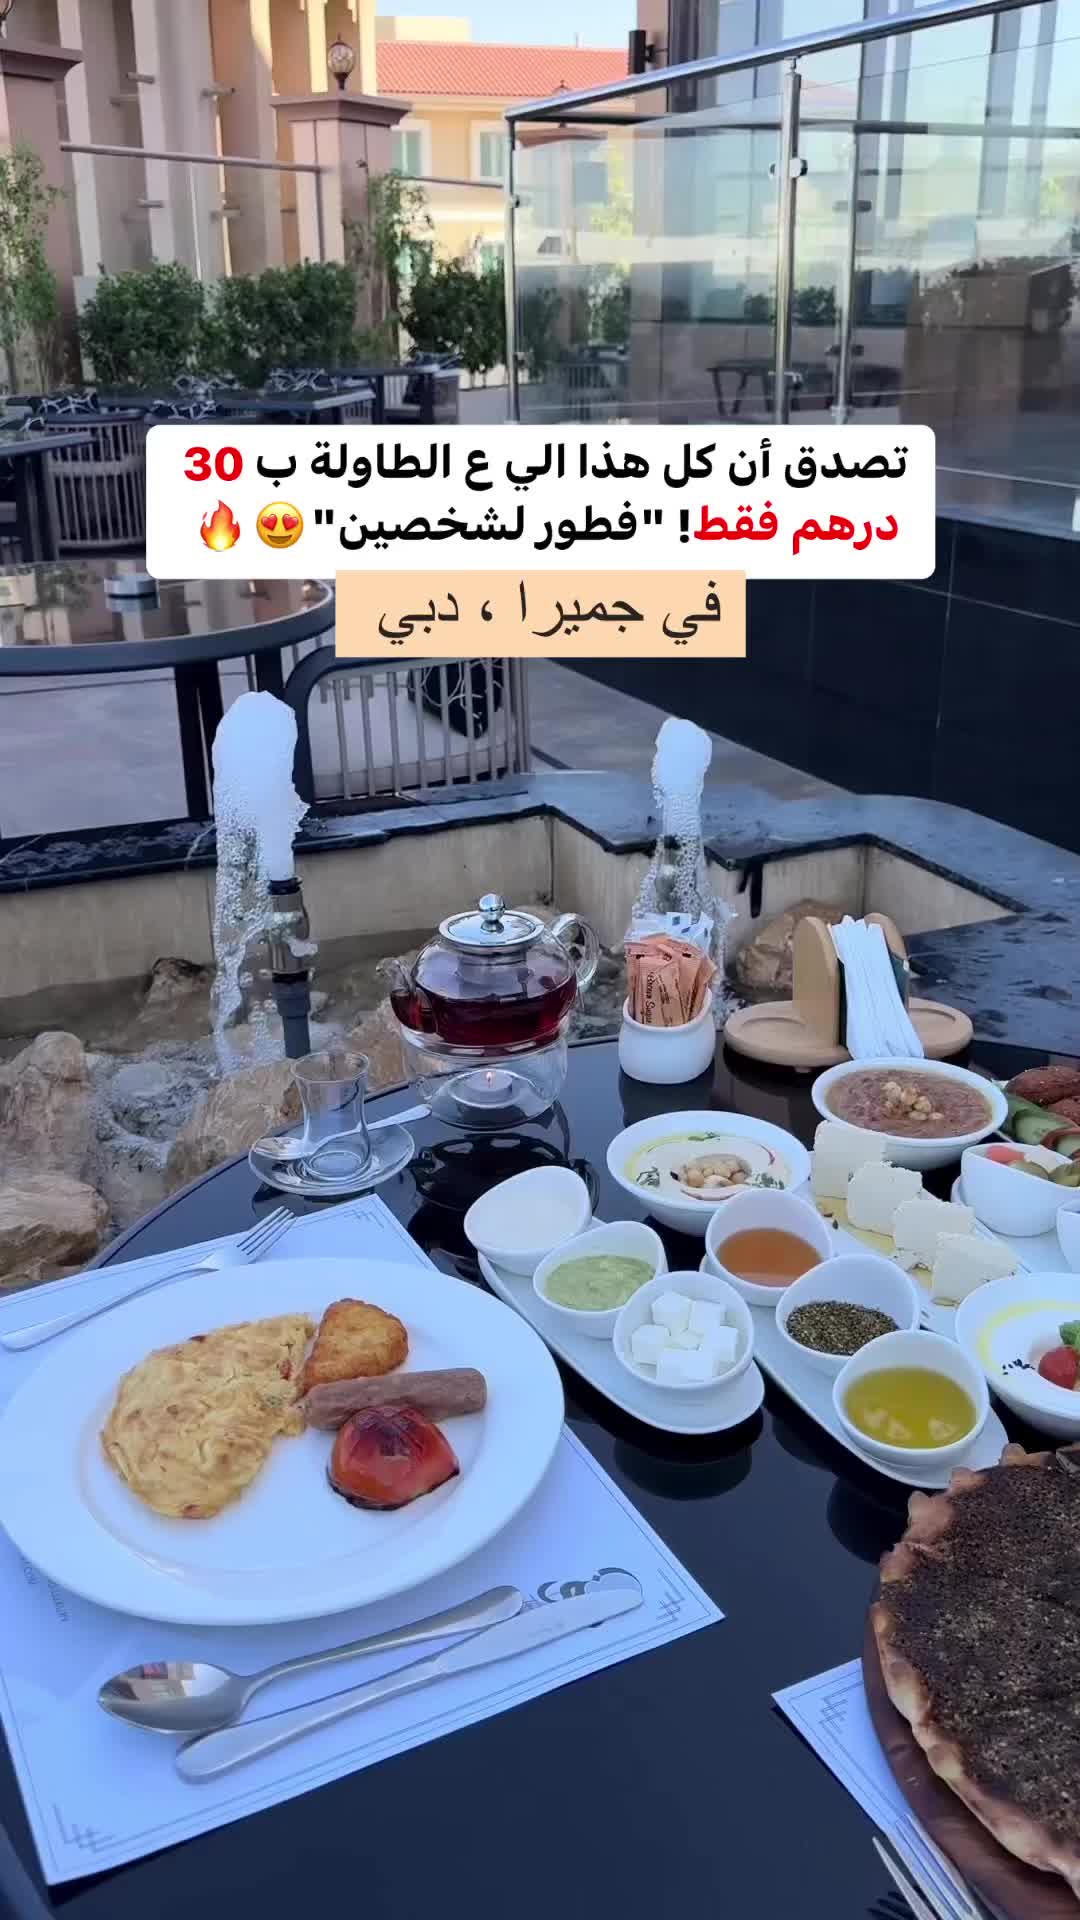 Best Breakfast for 2 in Jumeirah for 30 AED | Taraf Restaurant